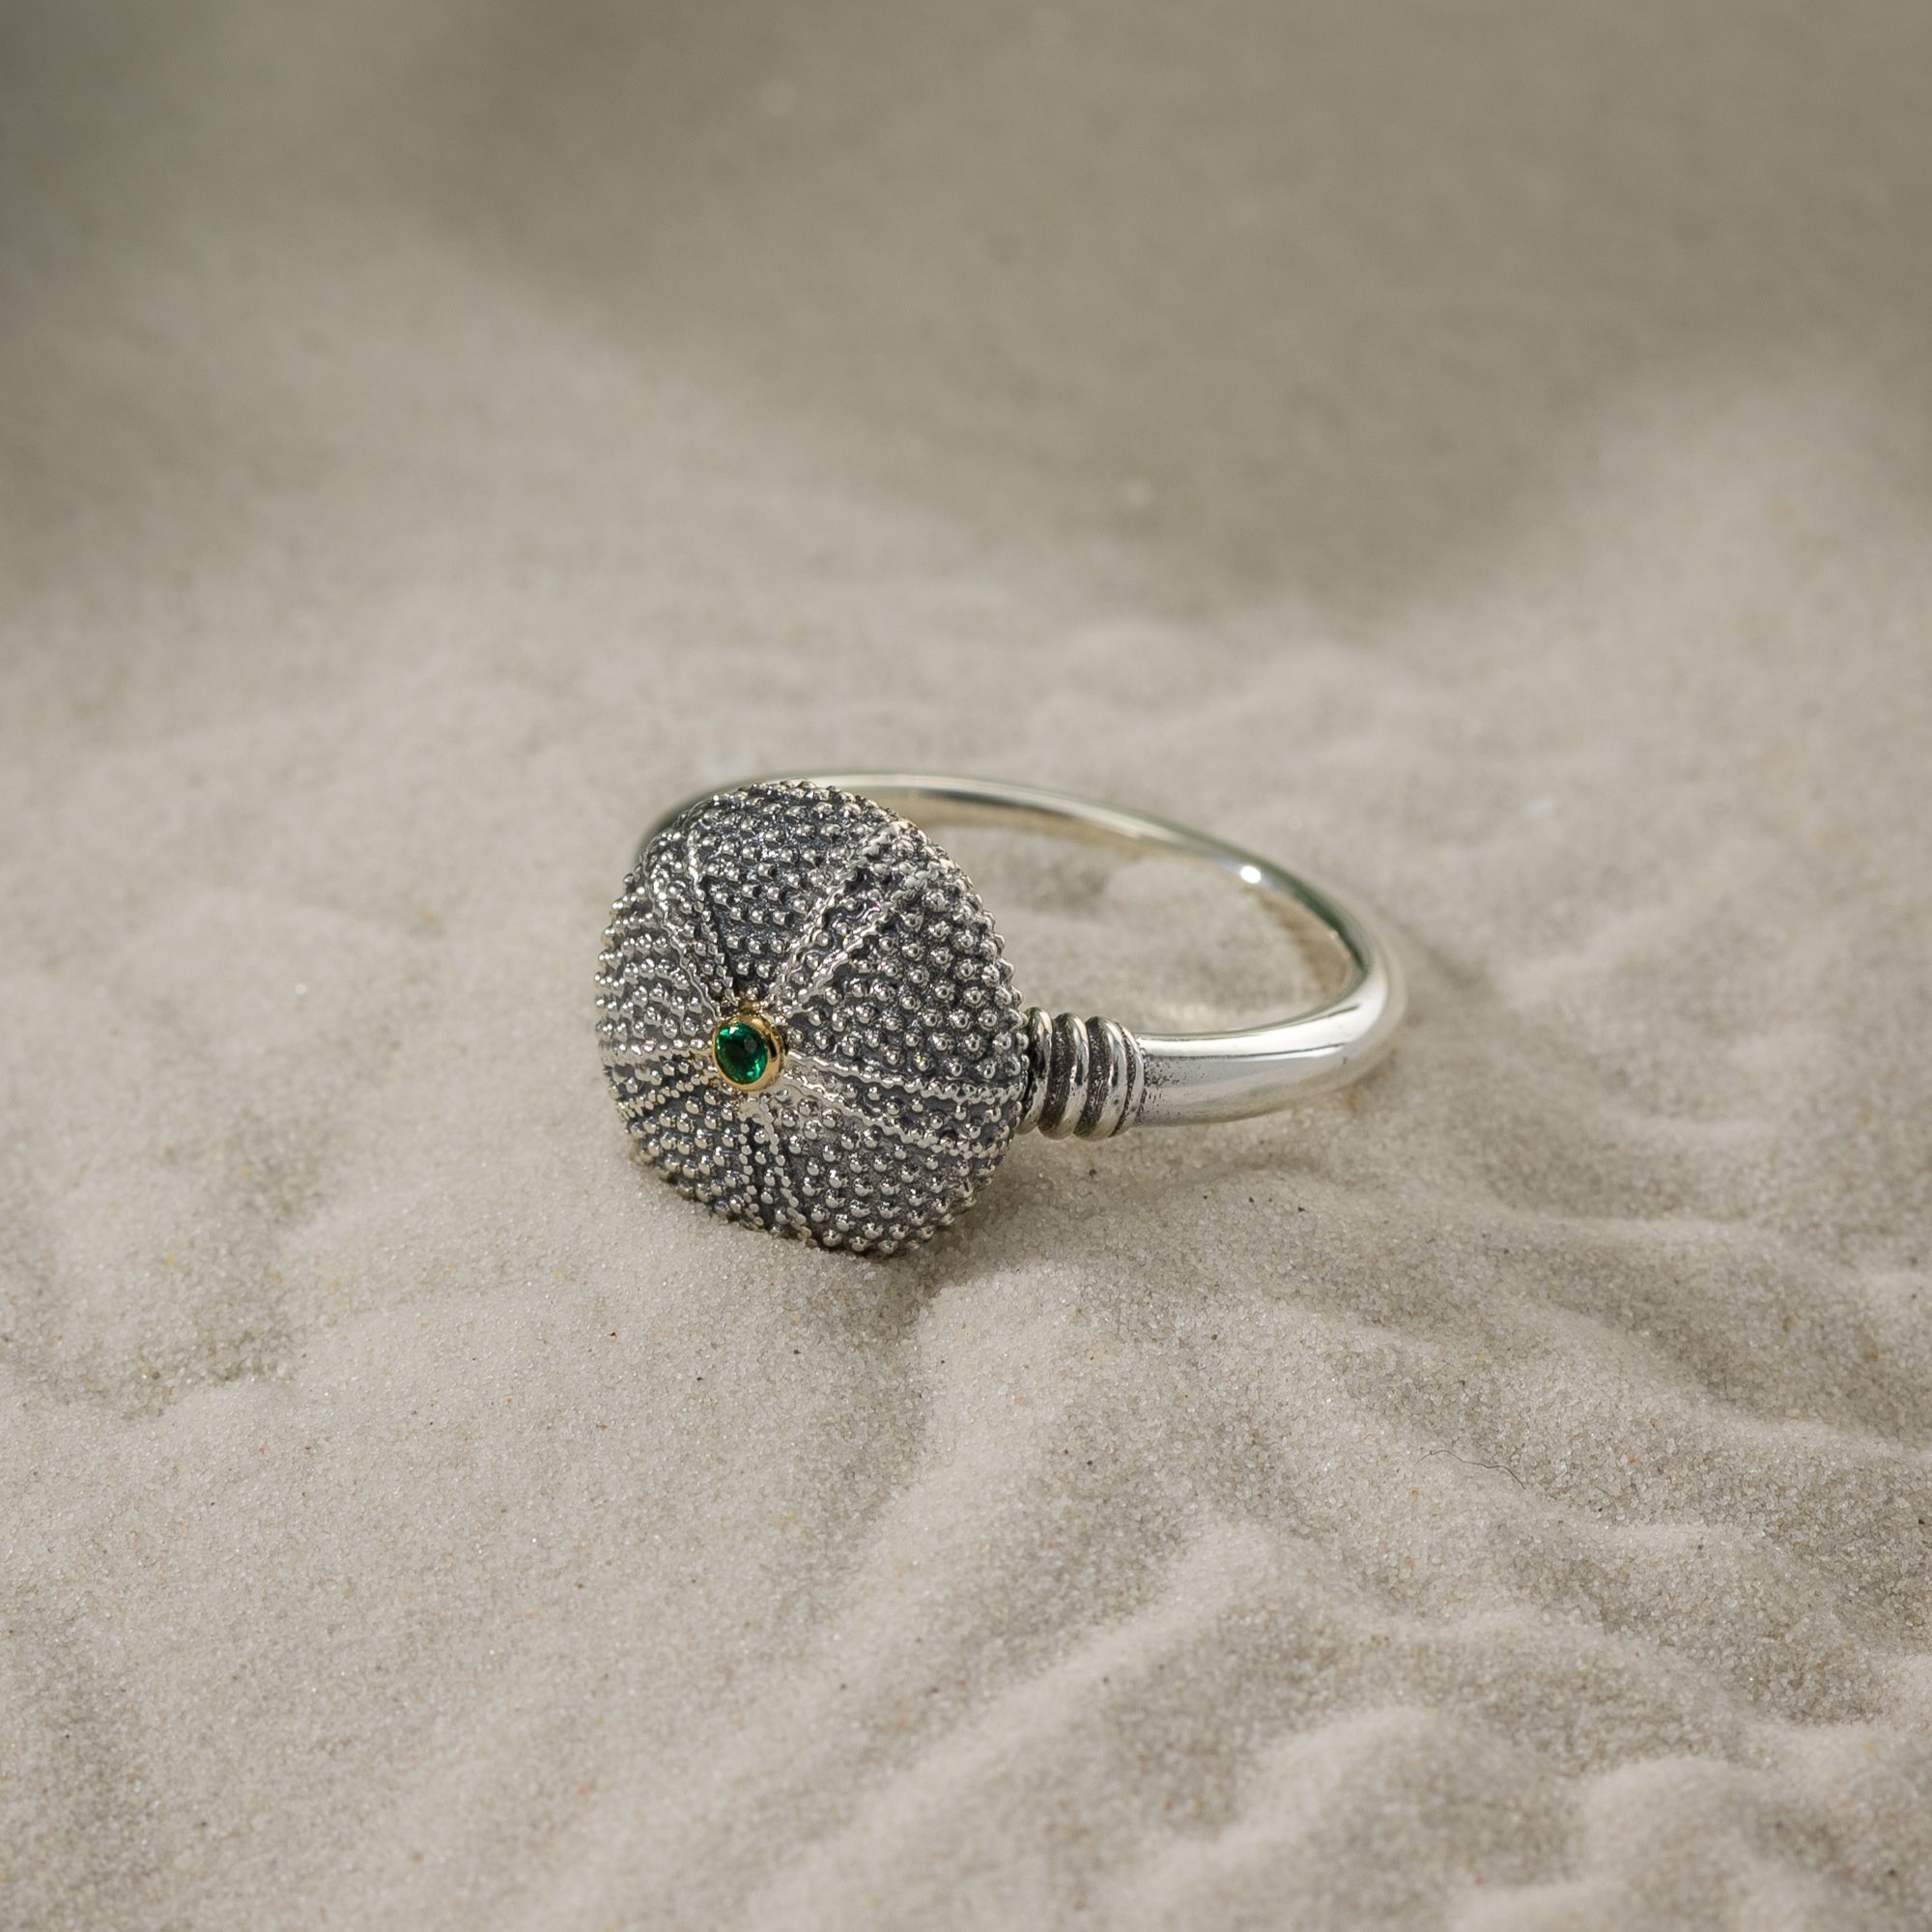 Sea Urchin Ring in Sterling Silver with 18K Gold detail and Tsavorite